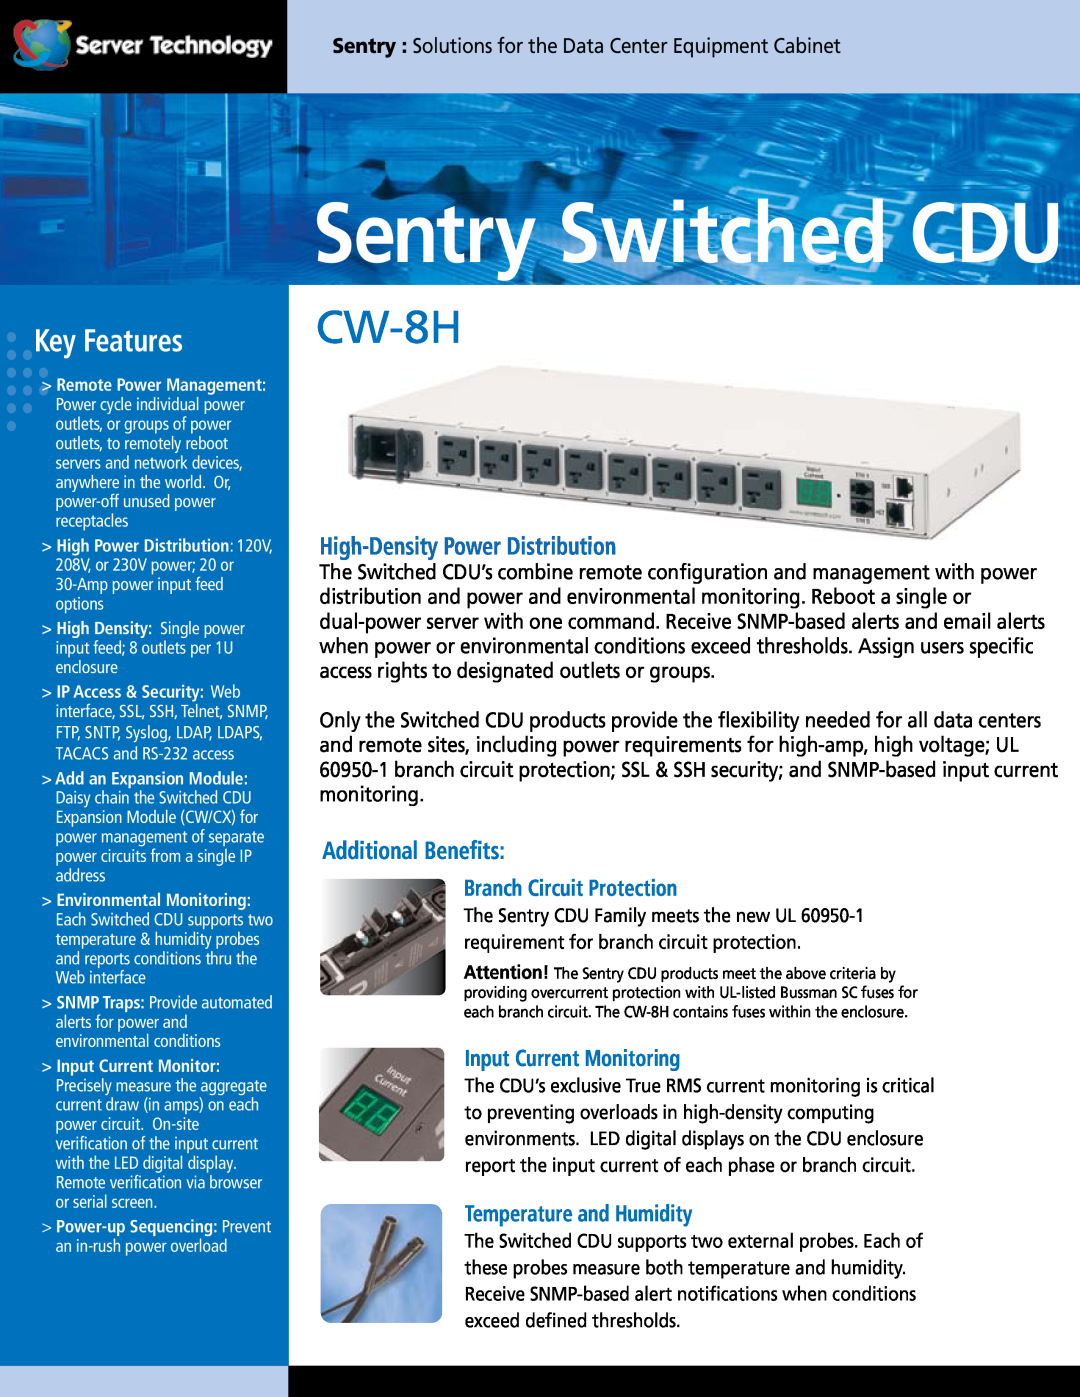 Server Technology CW-8H technical specifications Sentry Switched CDU, Key Features, High-Density Power Distribution 